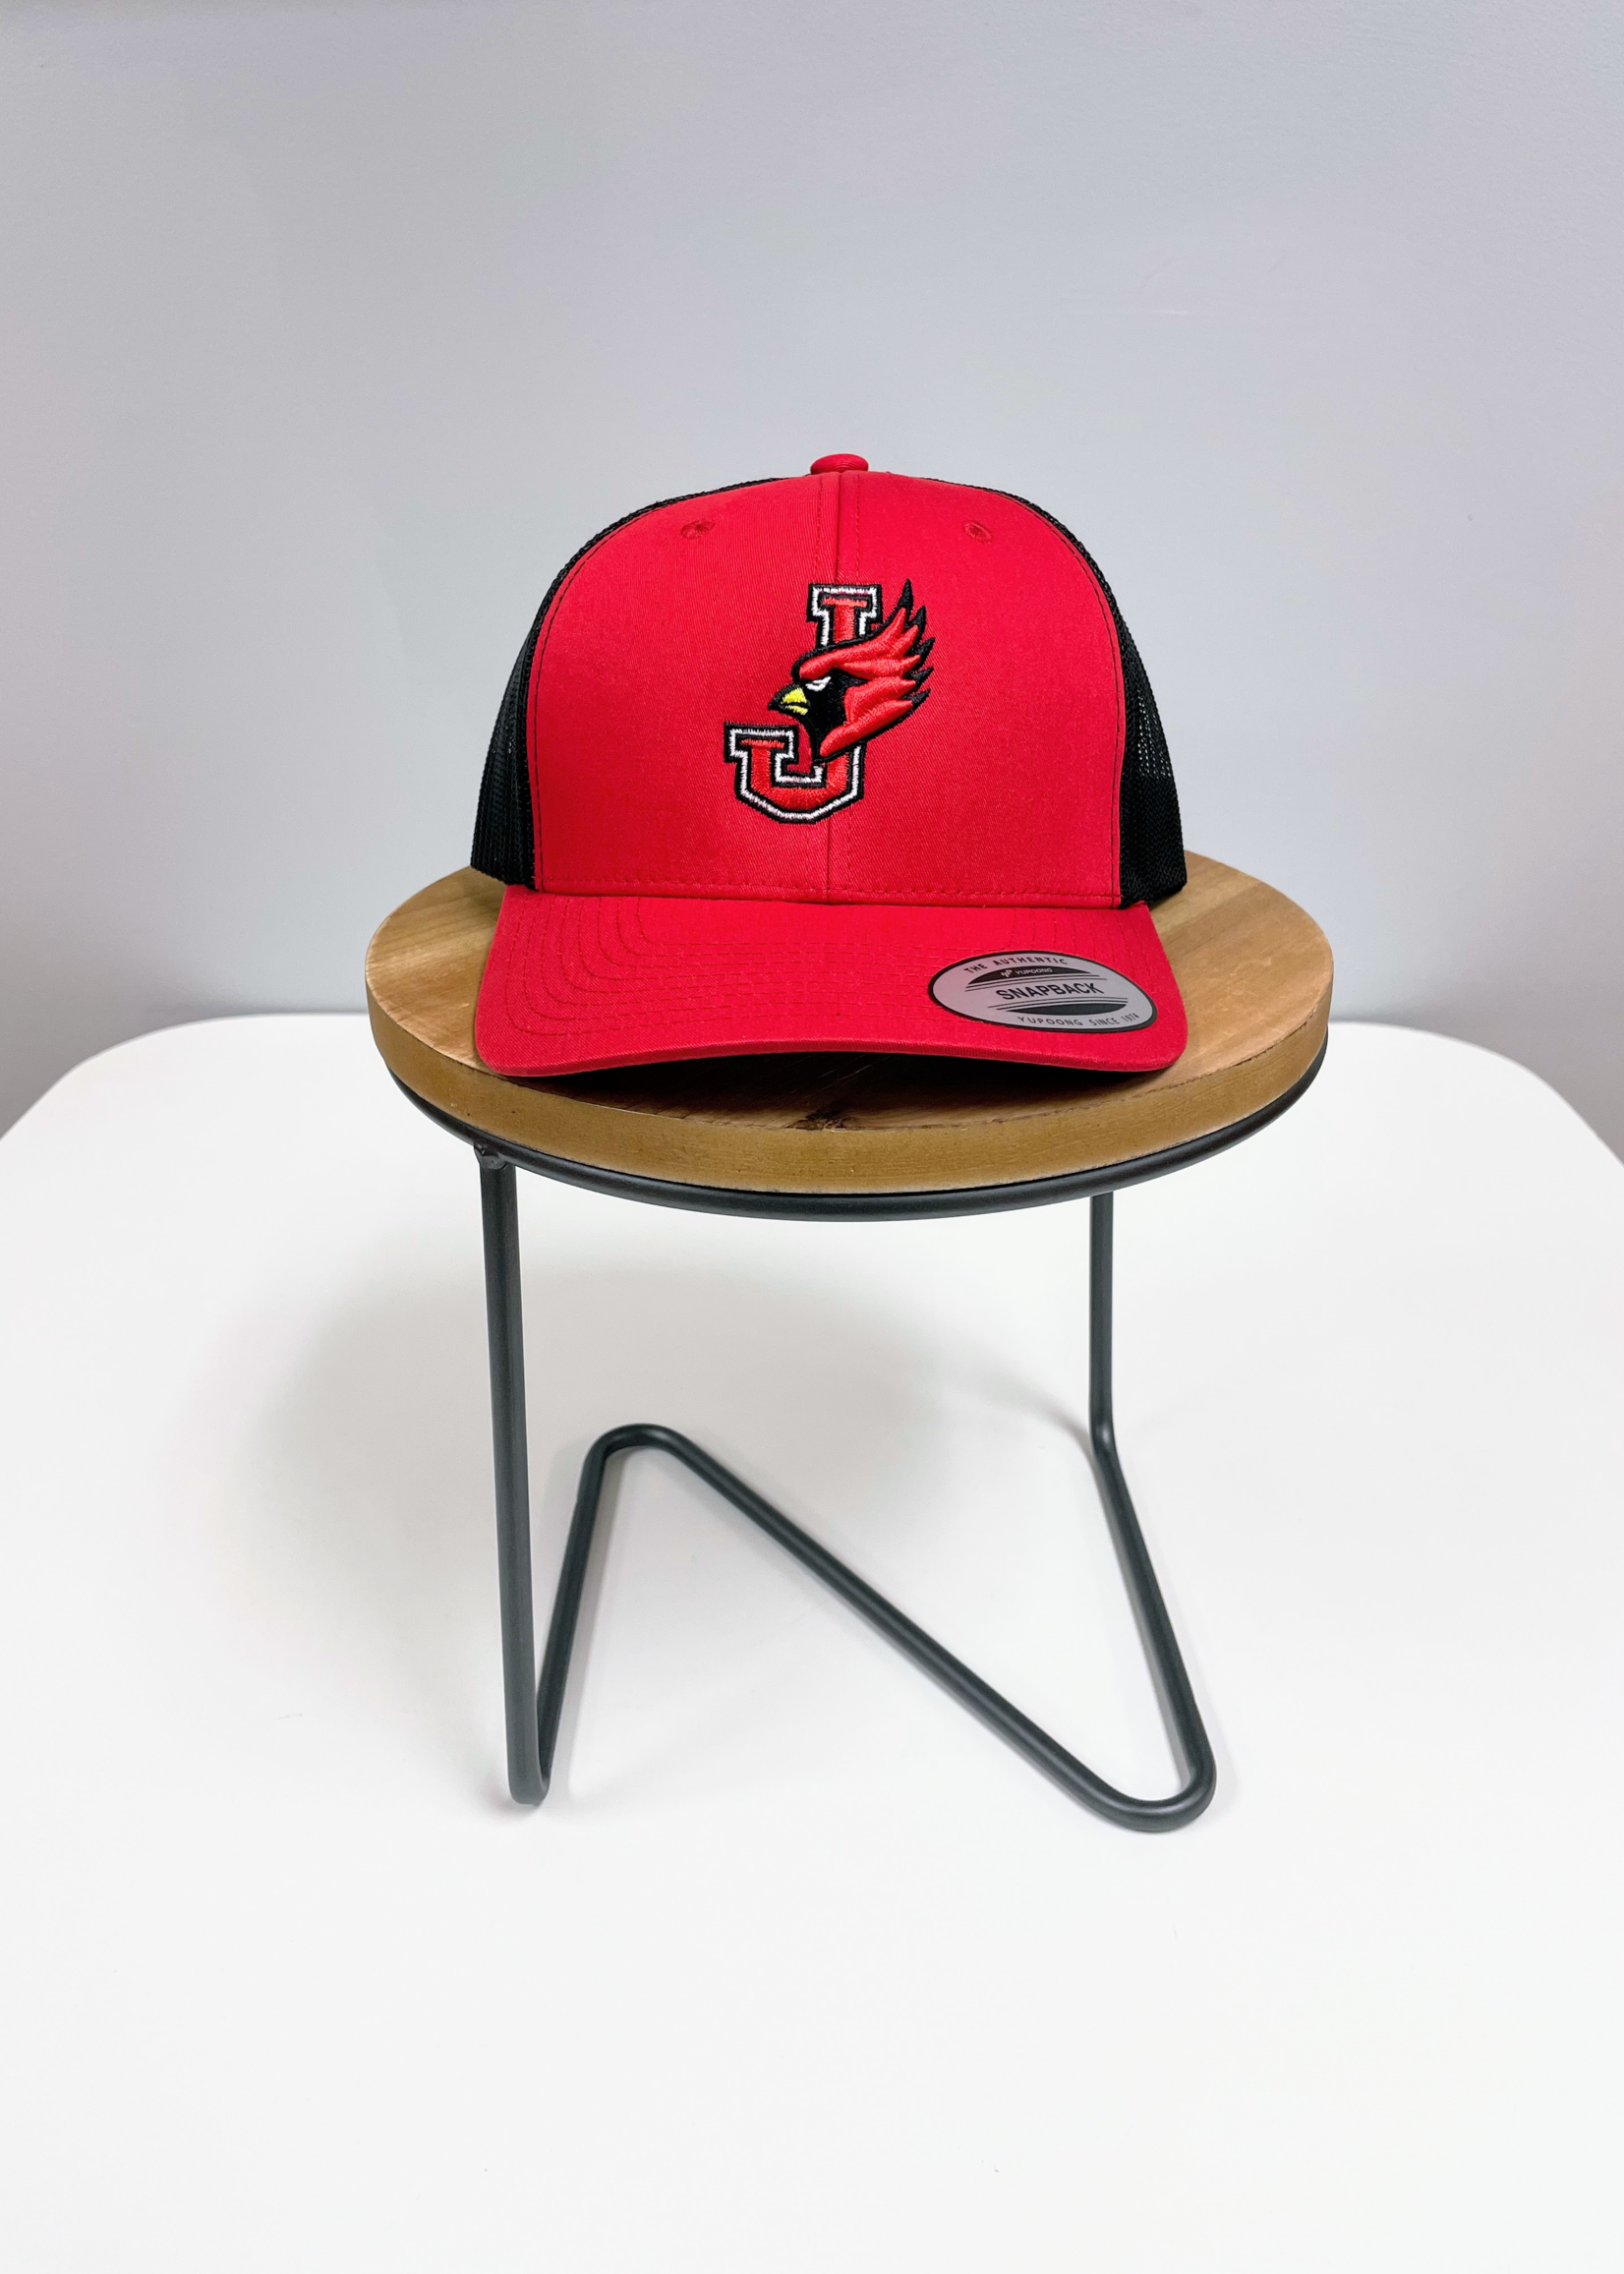 Jewell Retro Trucker hat Red/Black  with 3D embroidery